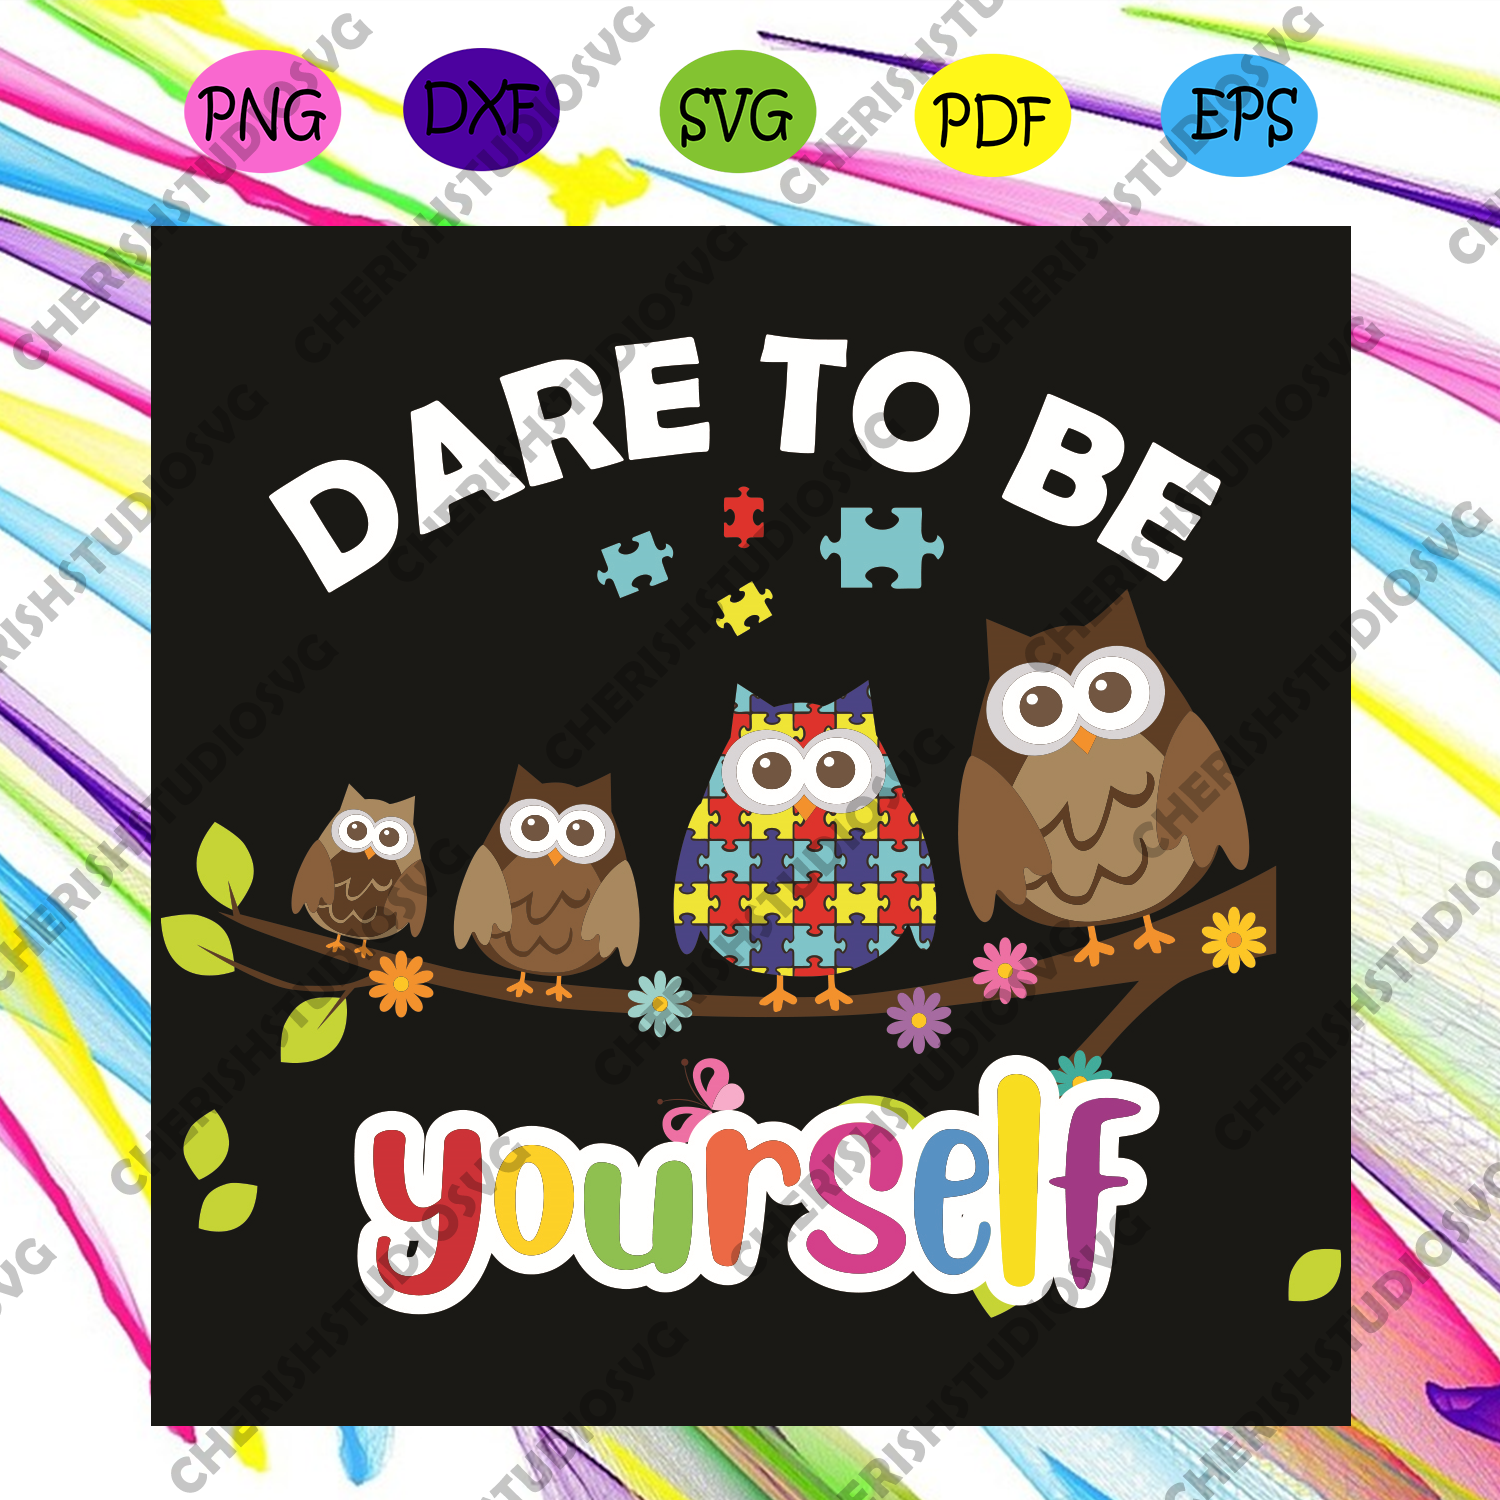 Download Dare To Be Yourself Autism Awareness Svg Awareness Svg Autism Awaren Cherishsvgstudio